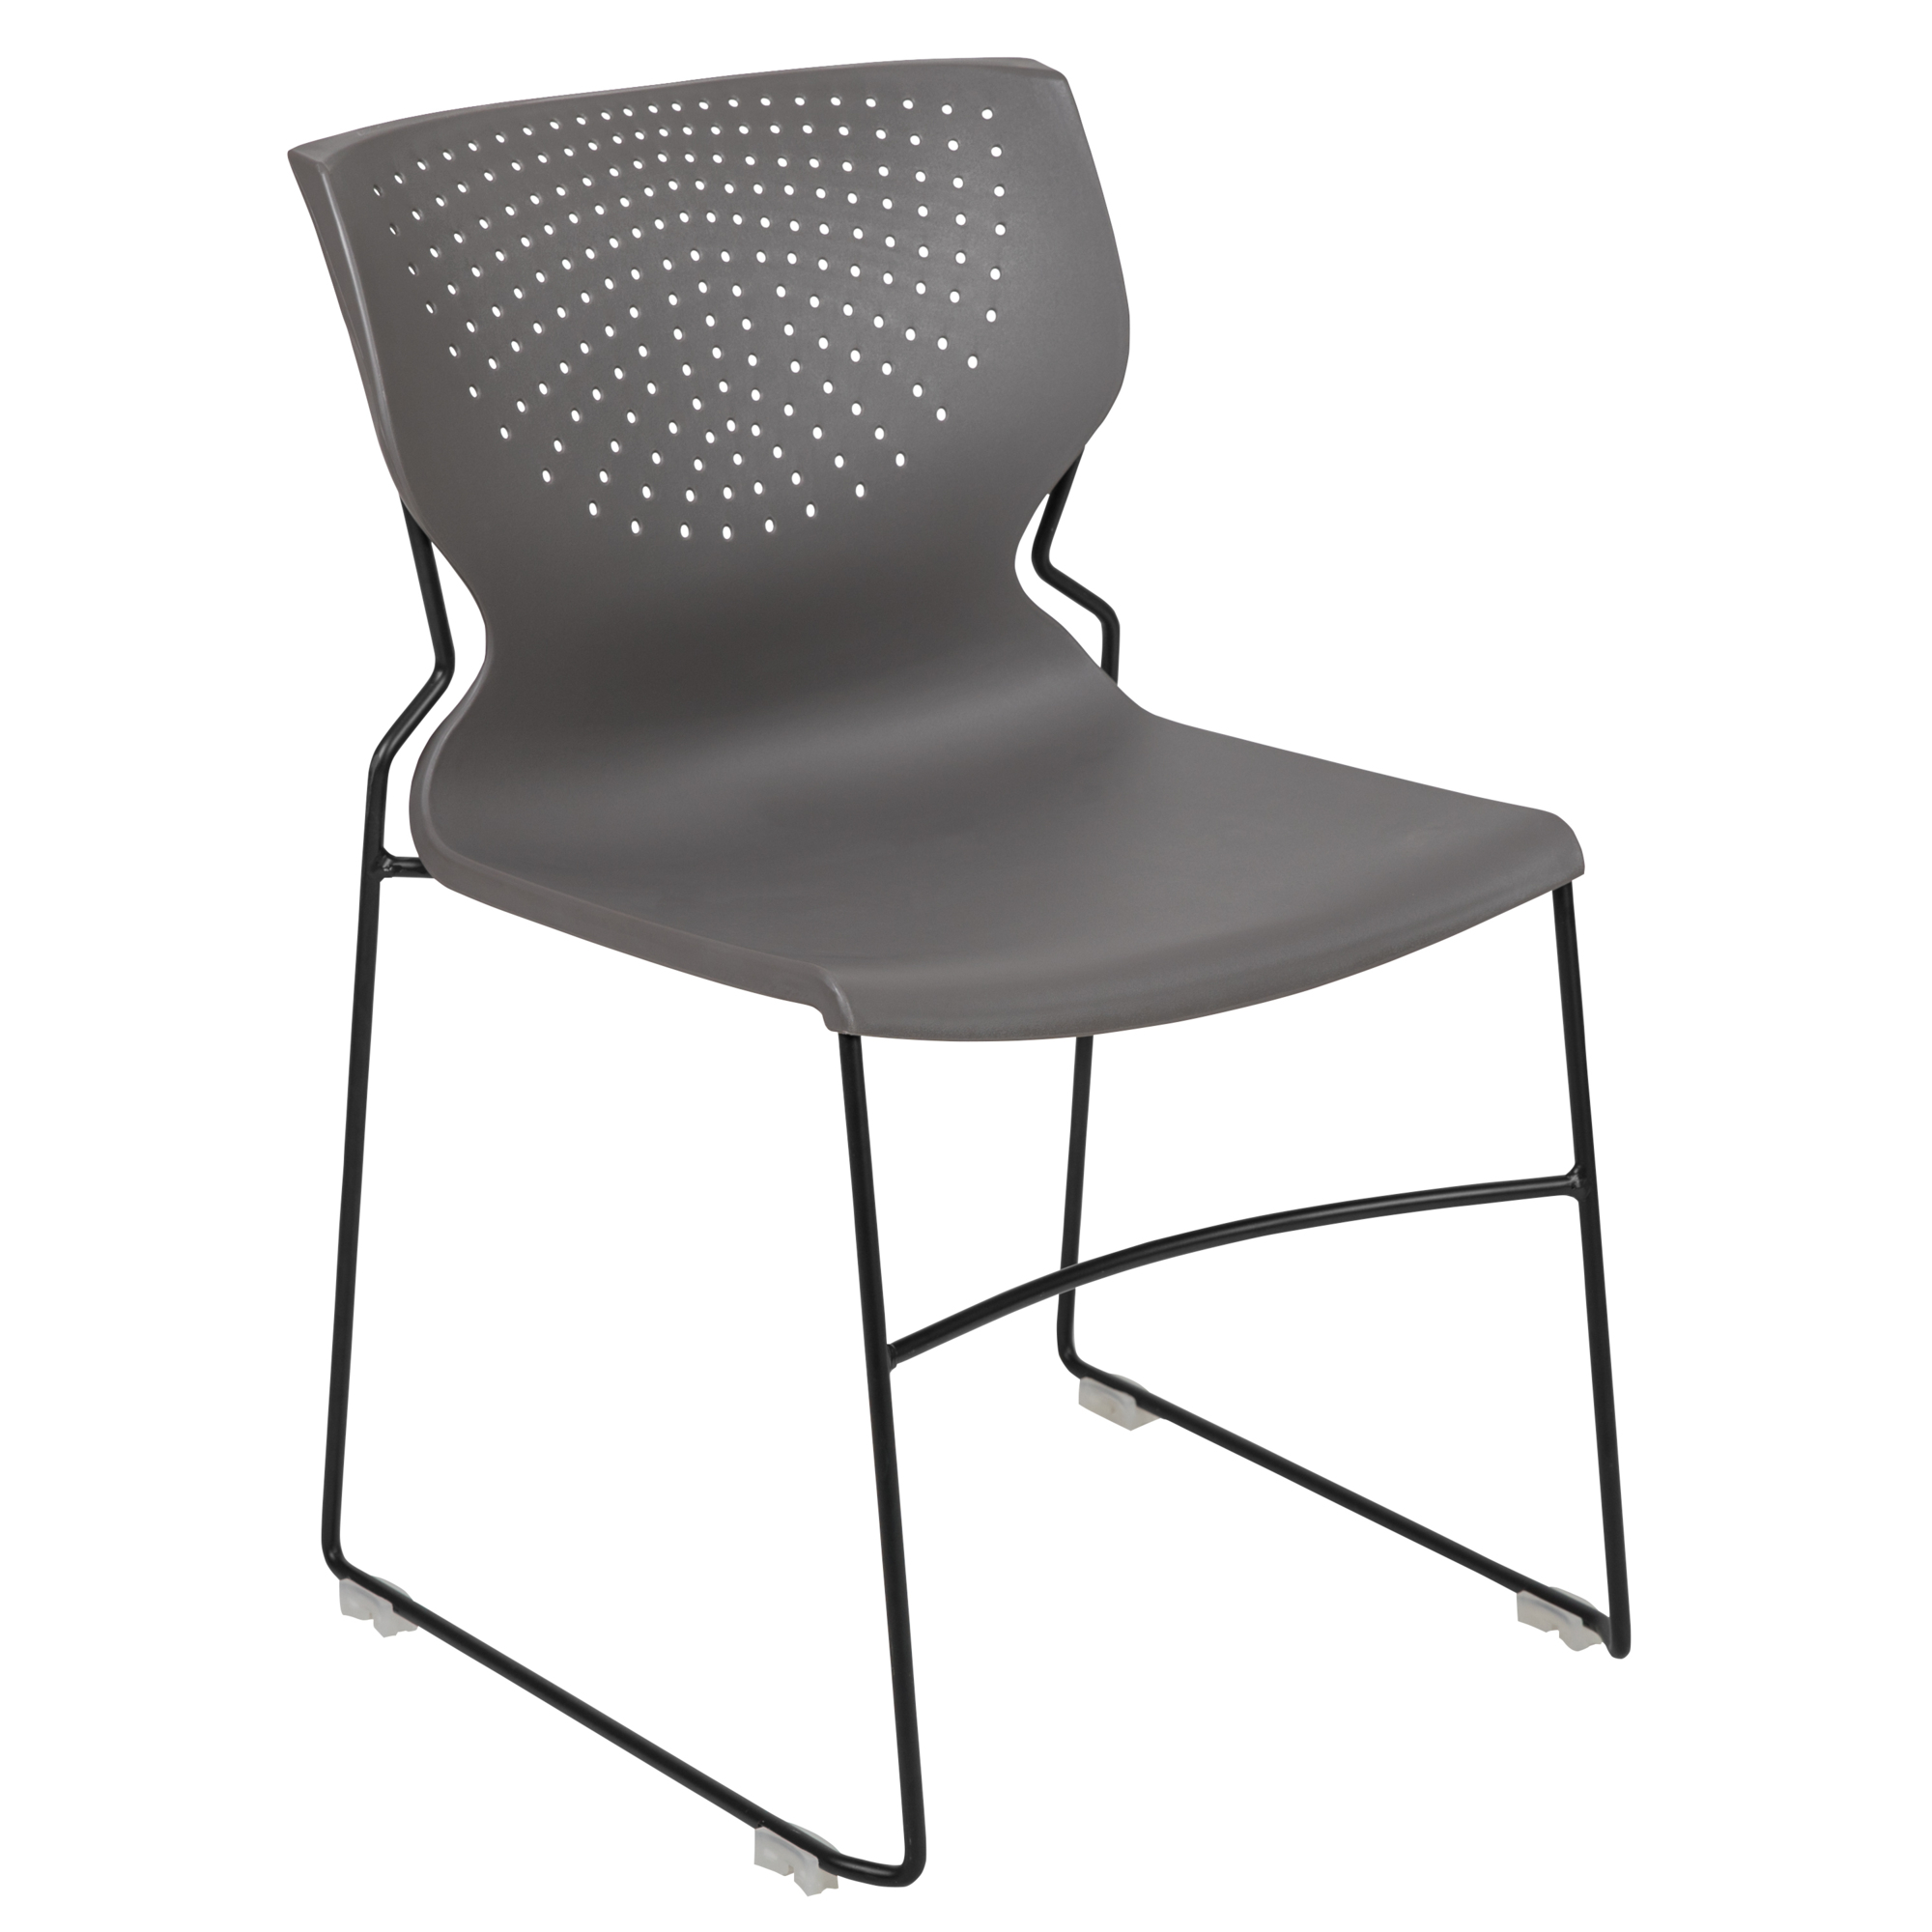 Flash Furniture, Gray Full Back Stack Chair with Black Frame, Primary Color Gray, Included (qty.) 1, Model RUT438GY